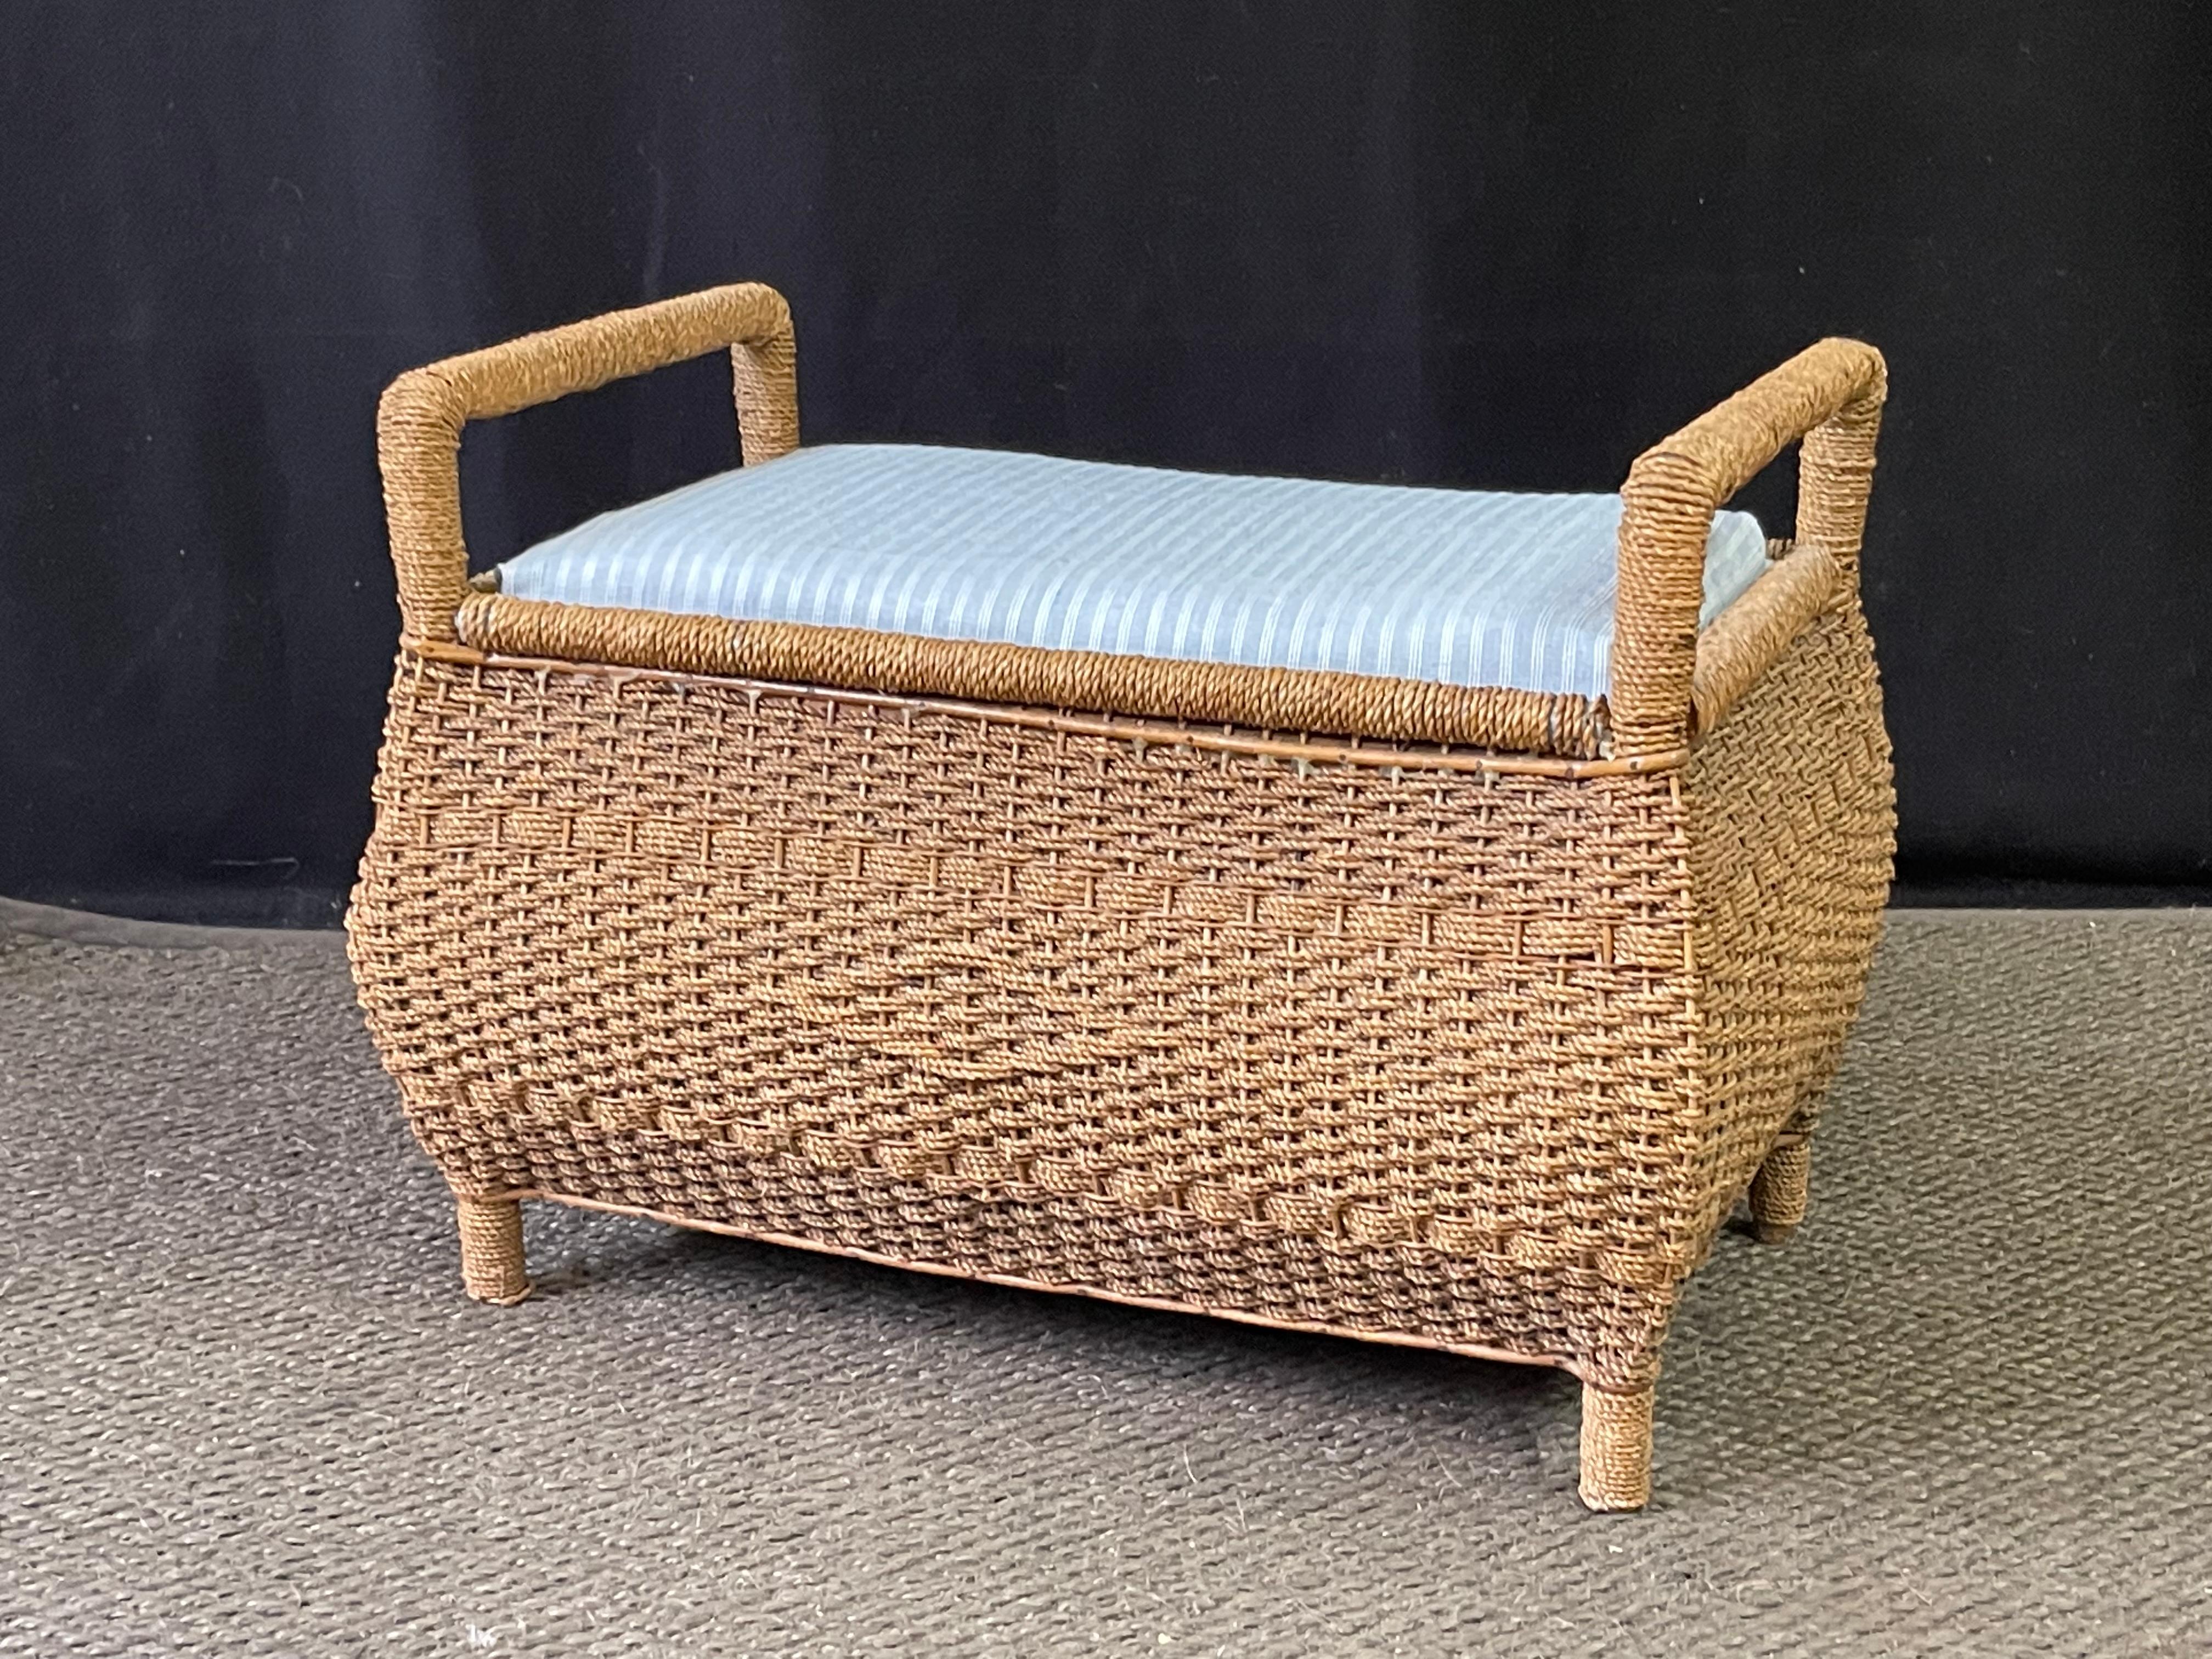 20th Century English bombay-shaped bench of rattan with ornate diamond and stripe decoration woven into the front. Beneath the upholstered seat cushion is a generous storage cavity originally used for sewing/looming supplies. The bench can be easily